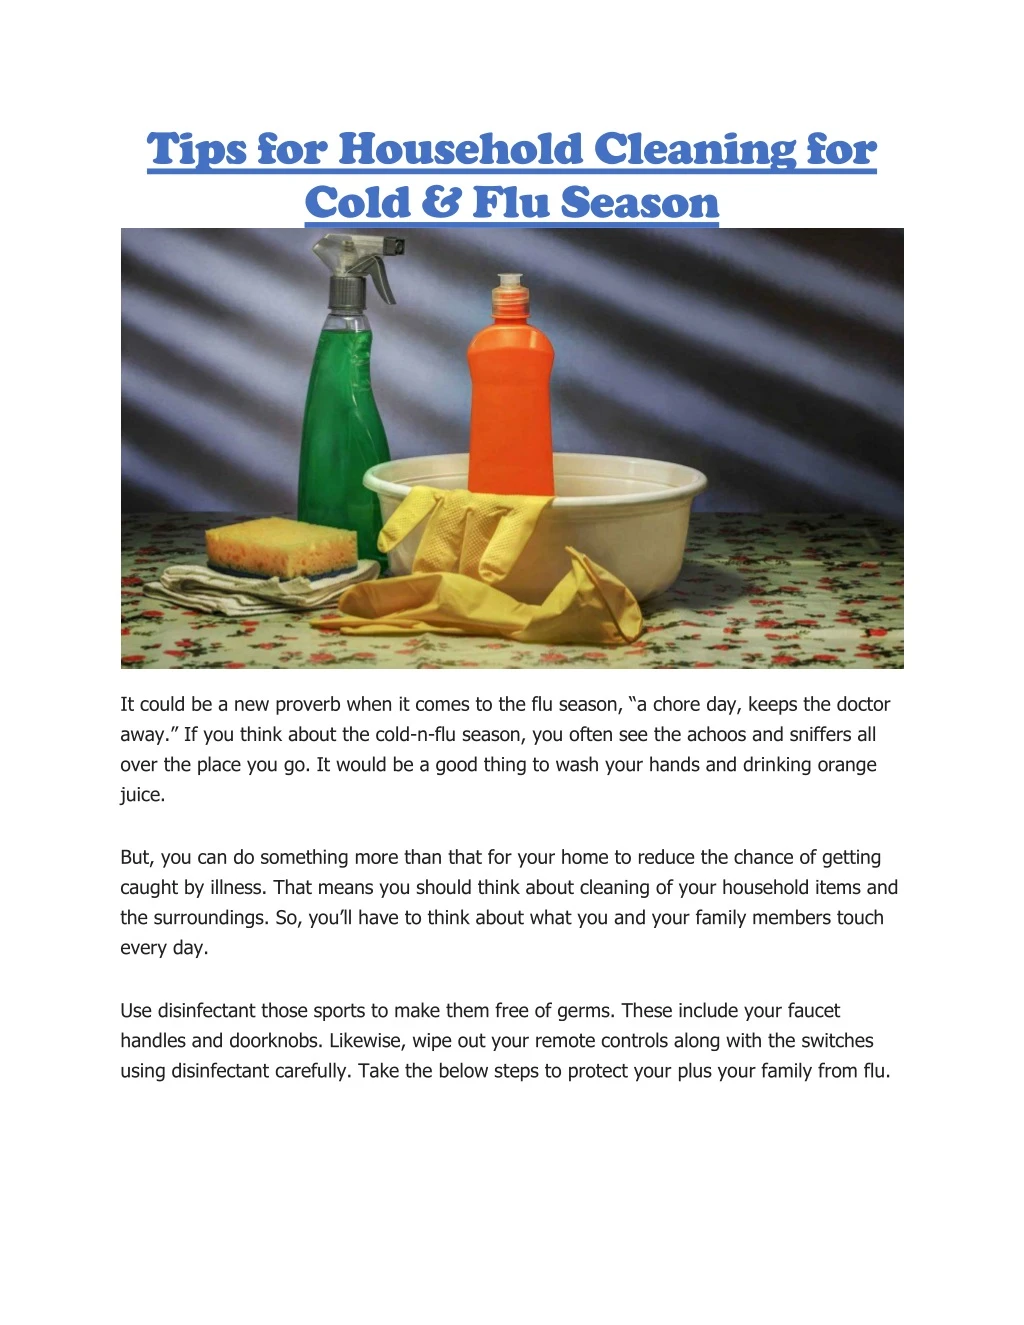 tips for household cleaning for cold flu season